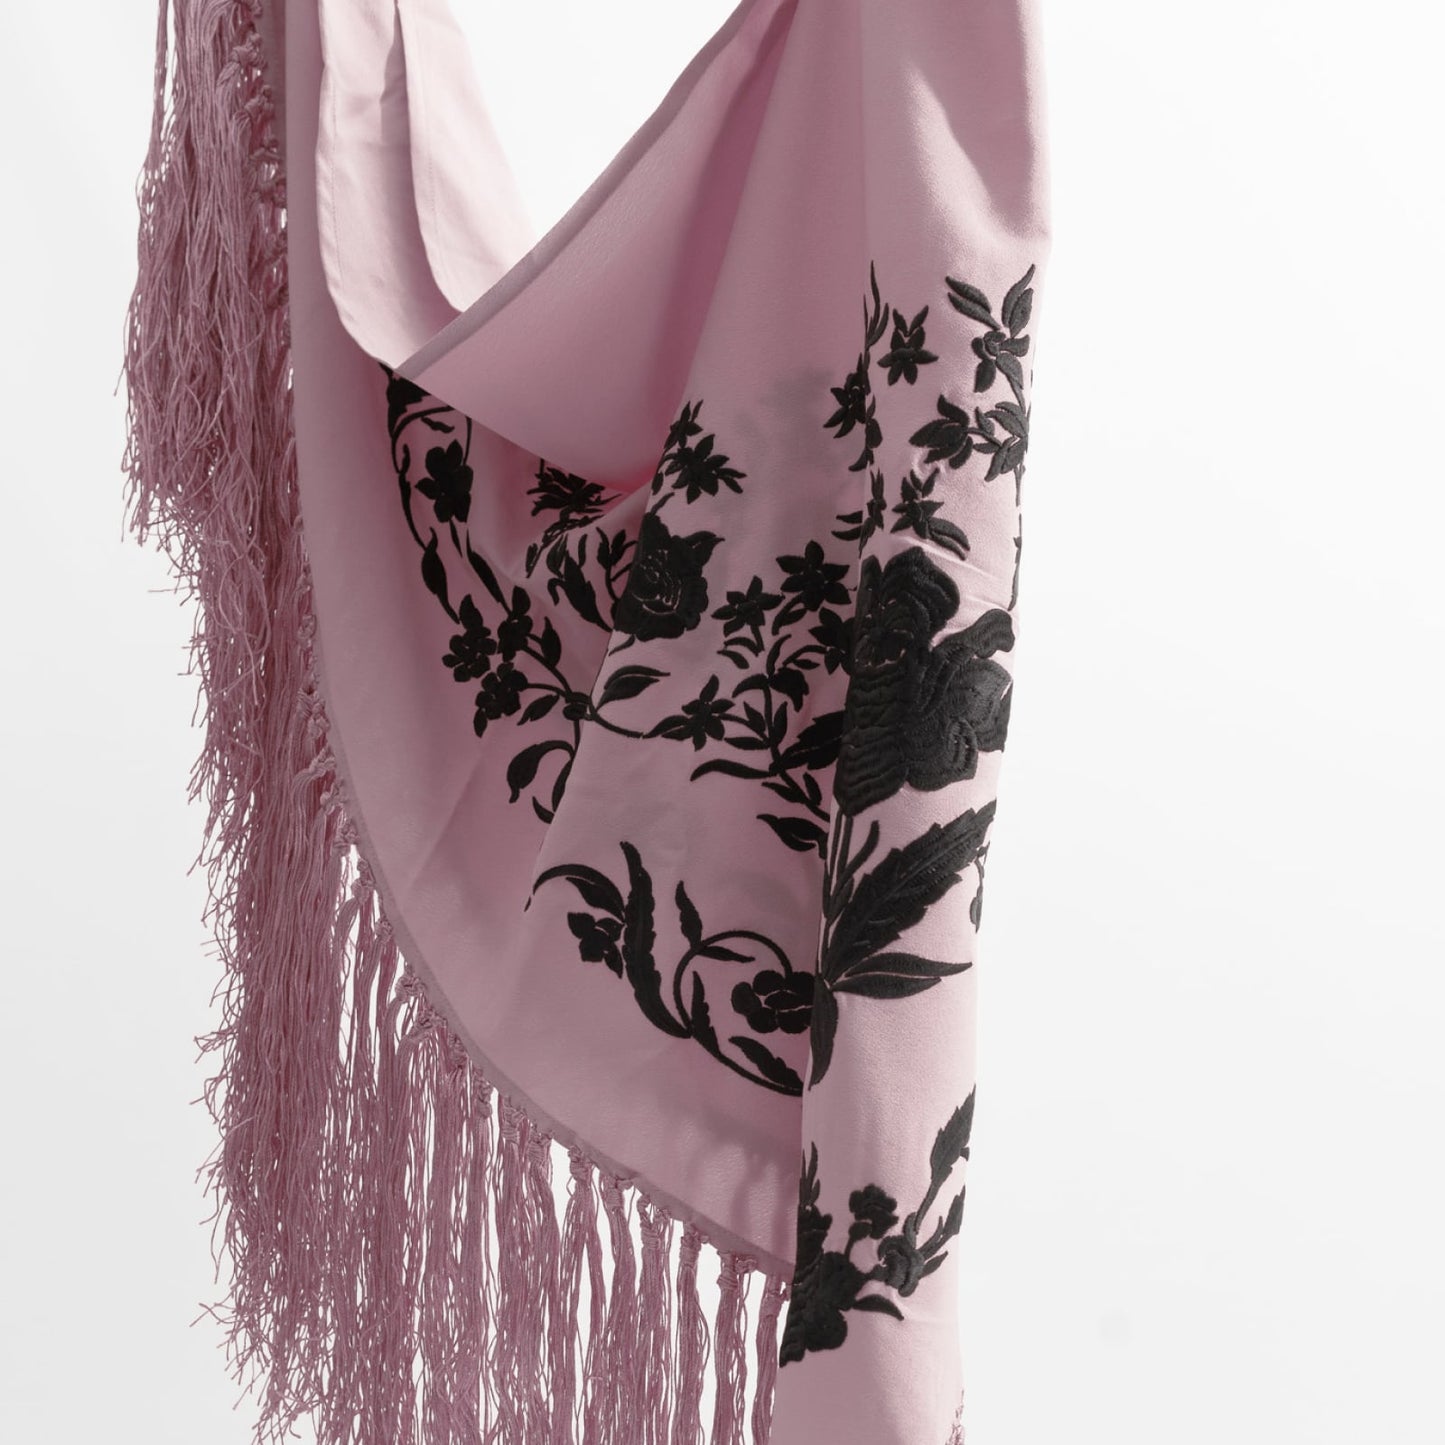 Rose and black floral embroidered mantoncillo shawl in crespon.